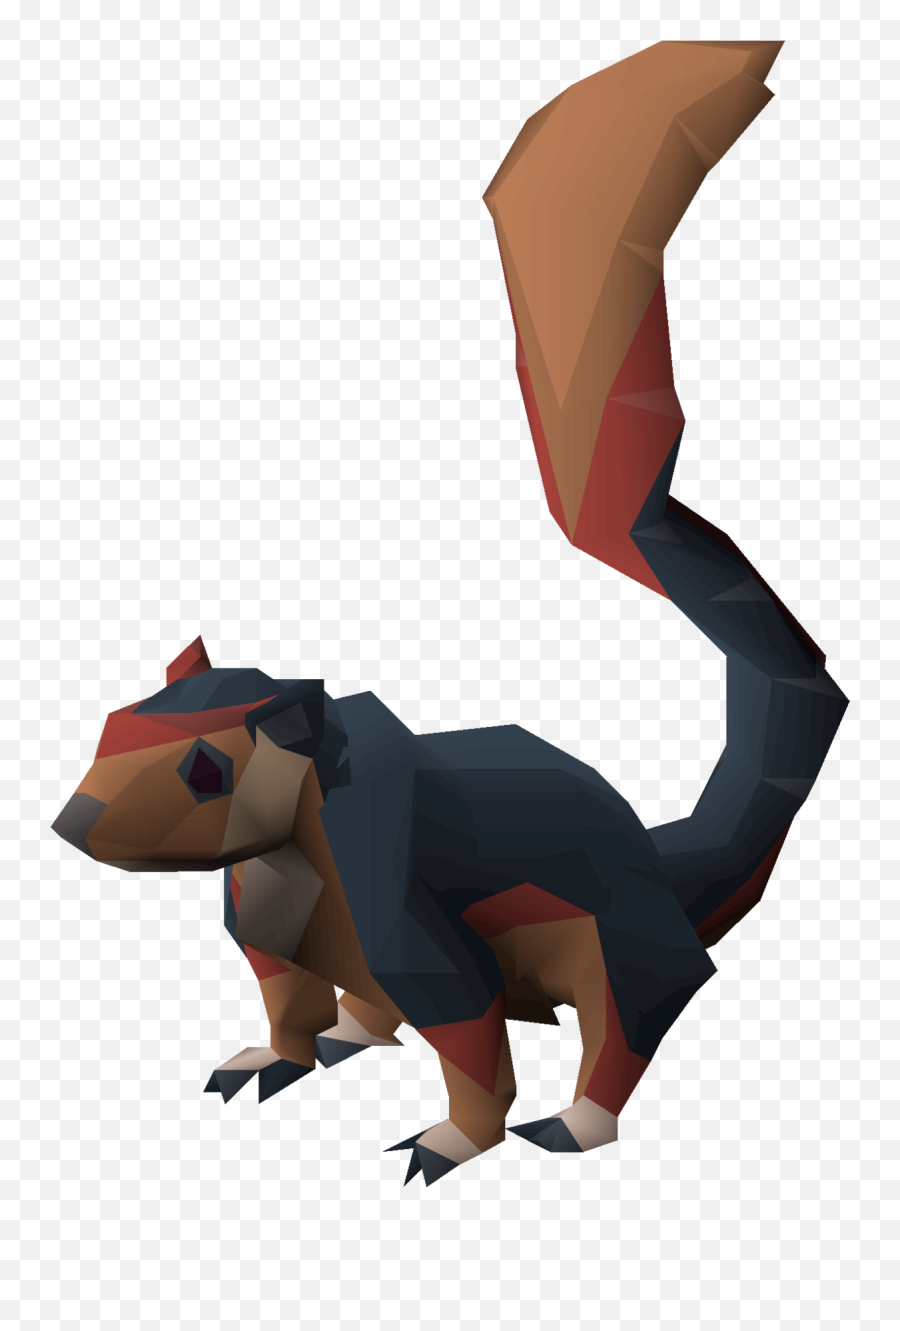 Giant Squirrel - Osrs Wiki Dark Acorn Squirrel Osrs Png,Squirrel Png